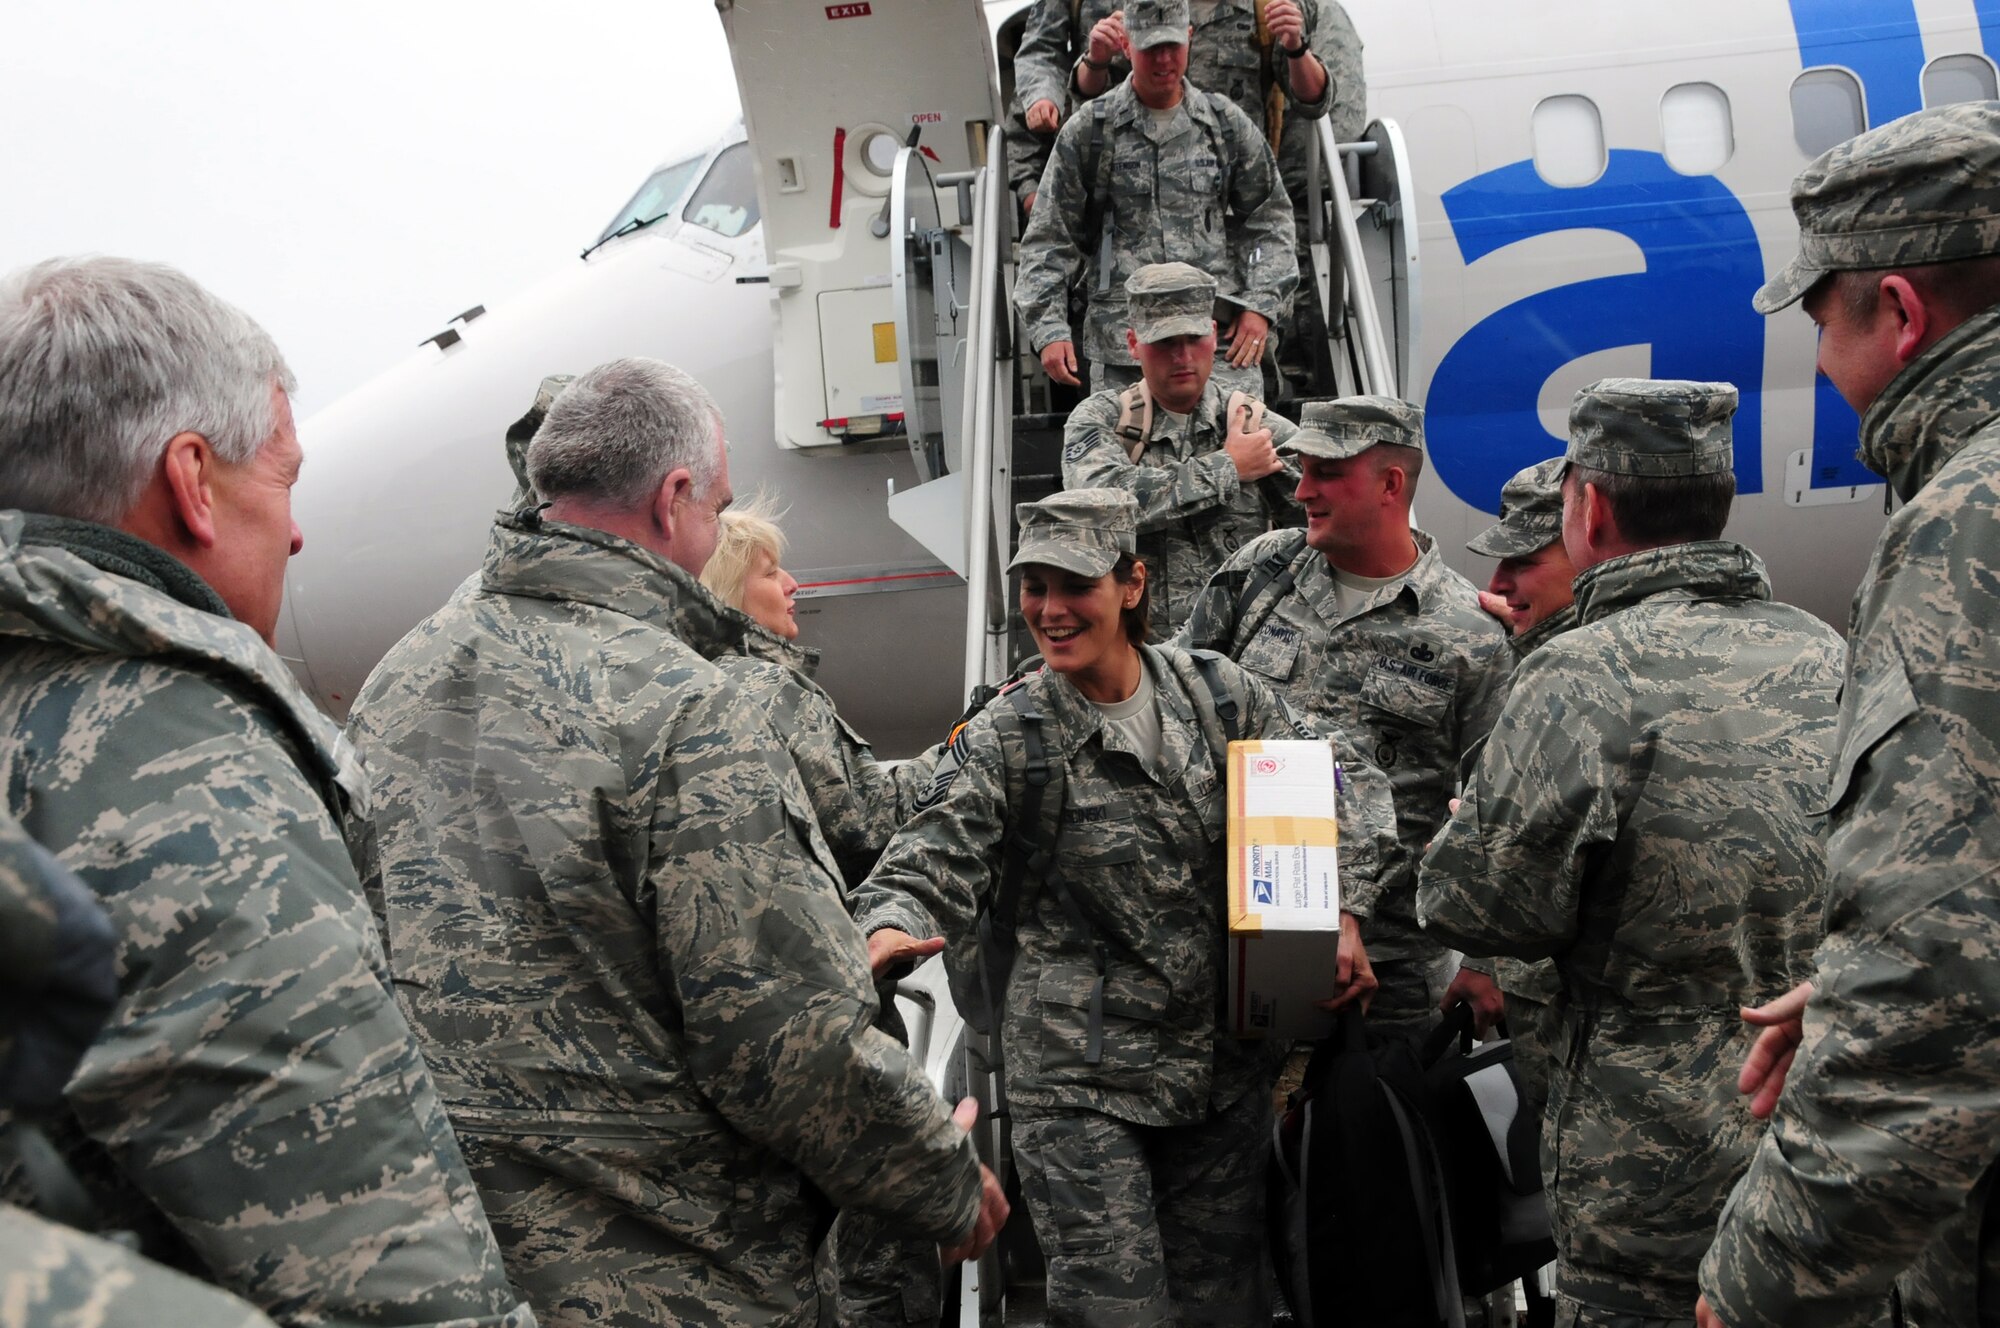 U.S. Air Force Chief Master Sgt. Susan Ksicinski, Security Forces Superintendant, is greeted by wing leadership as she gets off a plane at the Duluth, Minn., International Airport May 13, 2010. Approximately 35 Air National Guard members of the 148th Fighter Wing Security Forces Squadron returned to Duluth, Minn., after a 6-month deployment in southwest Asia. (U.S. Air Force photo by Master Sgt. Jason W. Rolfe/Released)